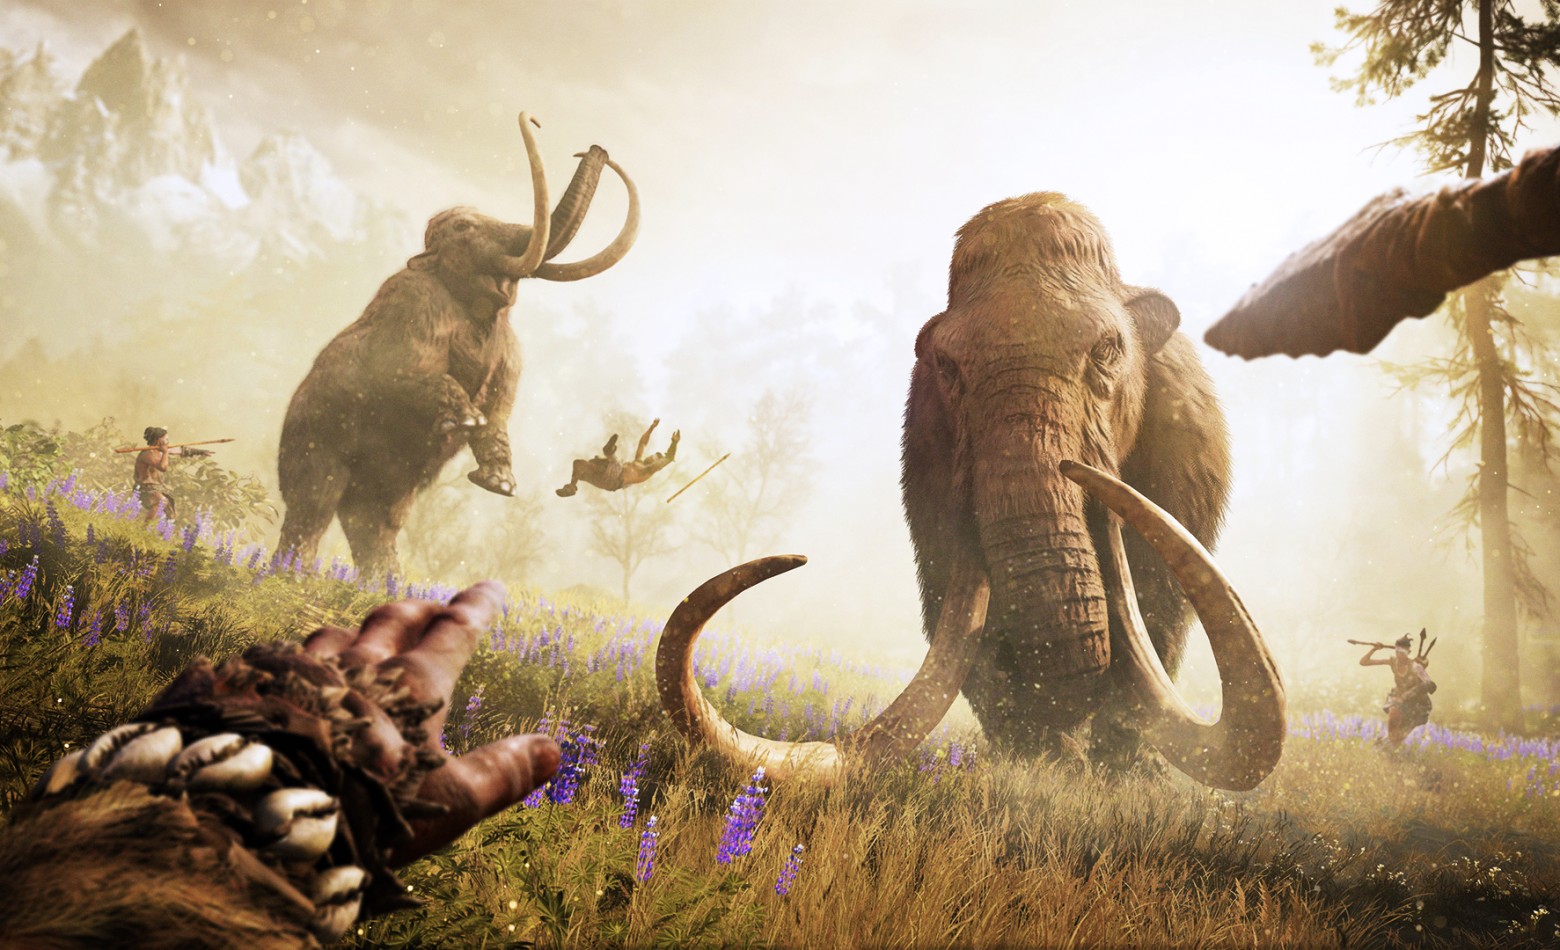 far cry primal ign download